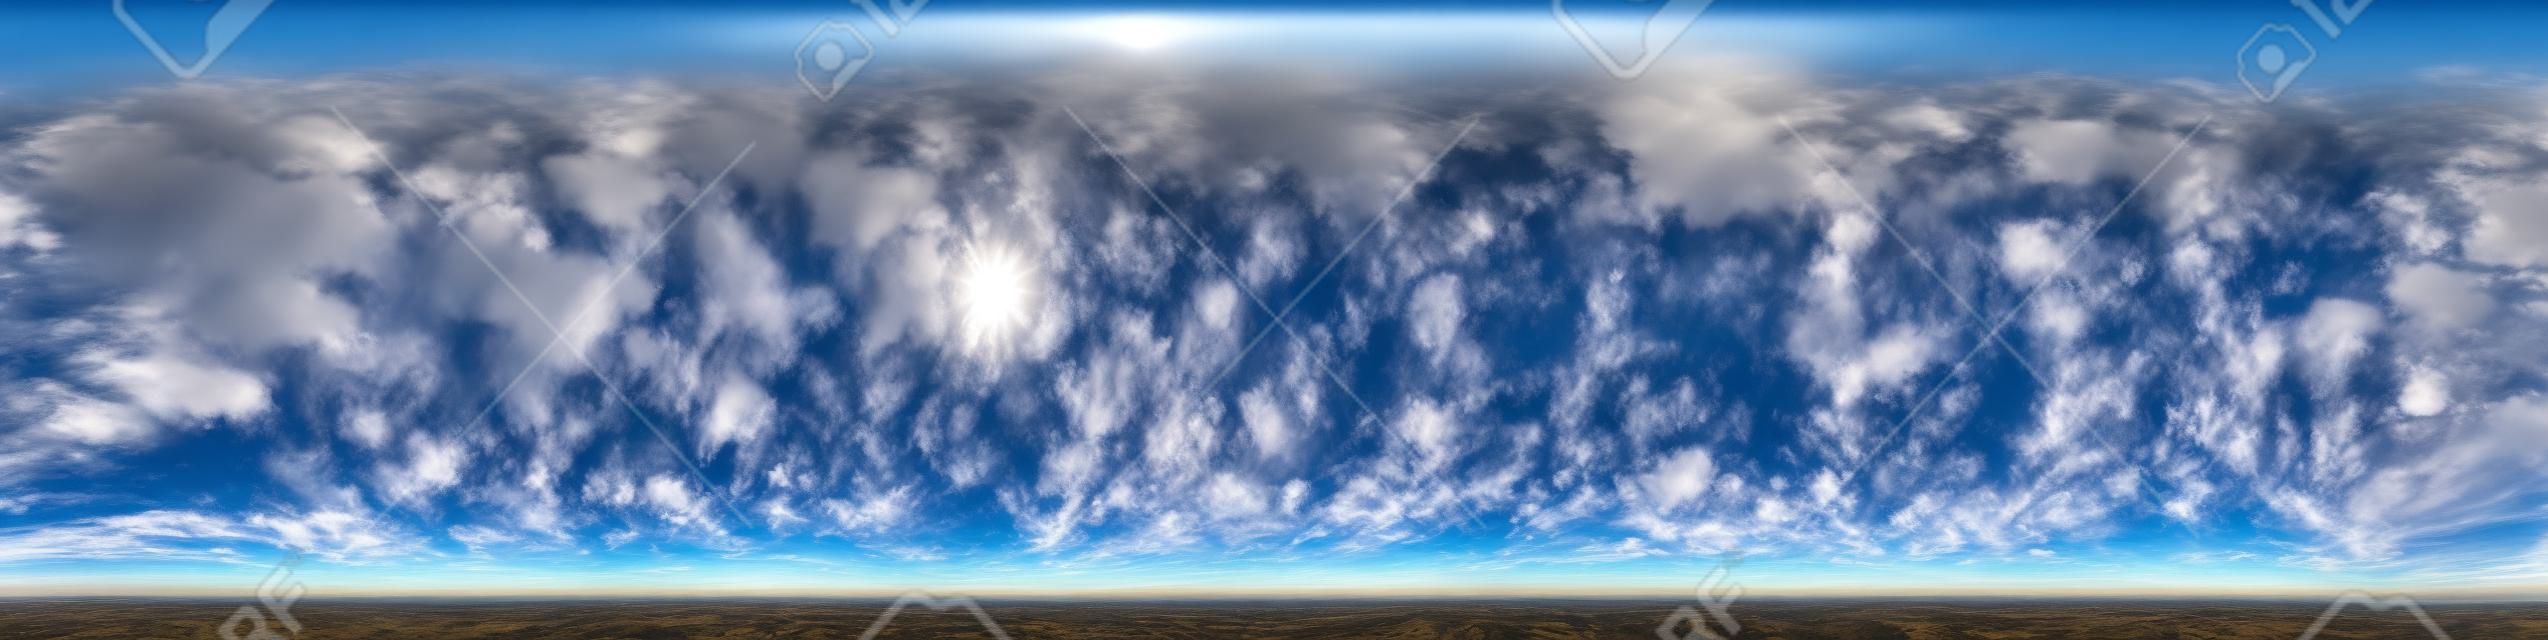 blue sky with beautiful awesome clouds. Seamless hdri panorama 360 degrees angle view with zenith for use in 3d graphics or game development as sky dome or edit drone shot